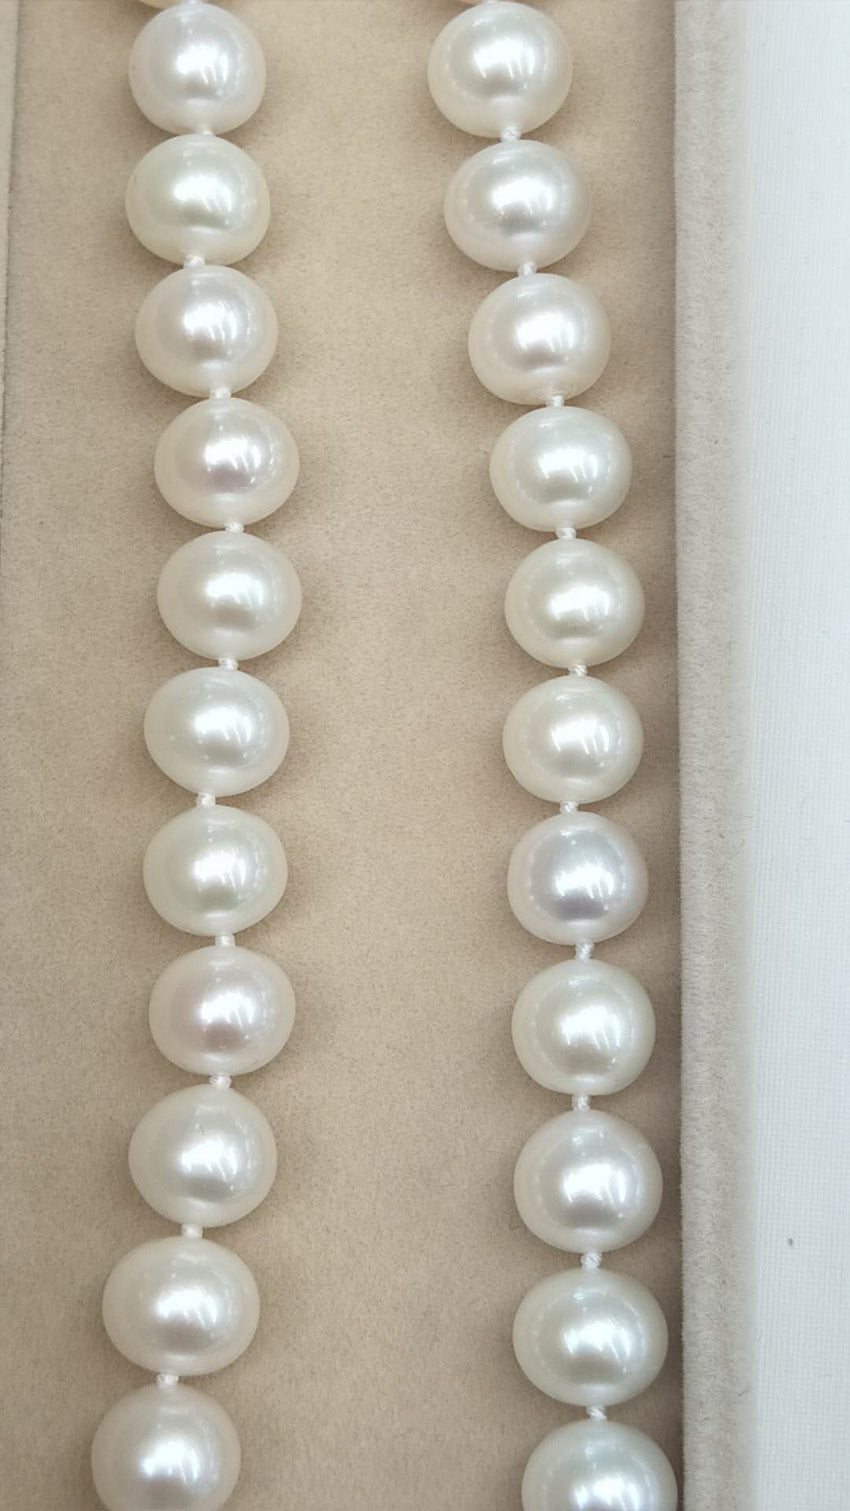 AAA grade 9.5-10.5mm Cultured Freshwater Pearl Strand Necklace with Sterling Silver Clasp - 18"